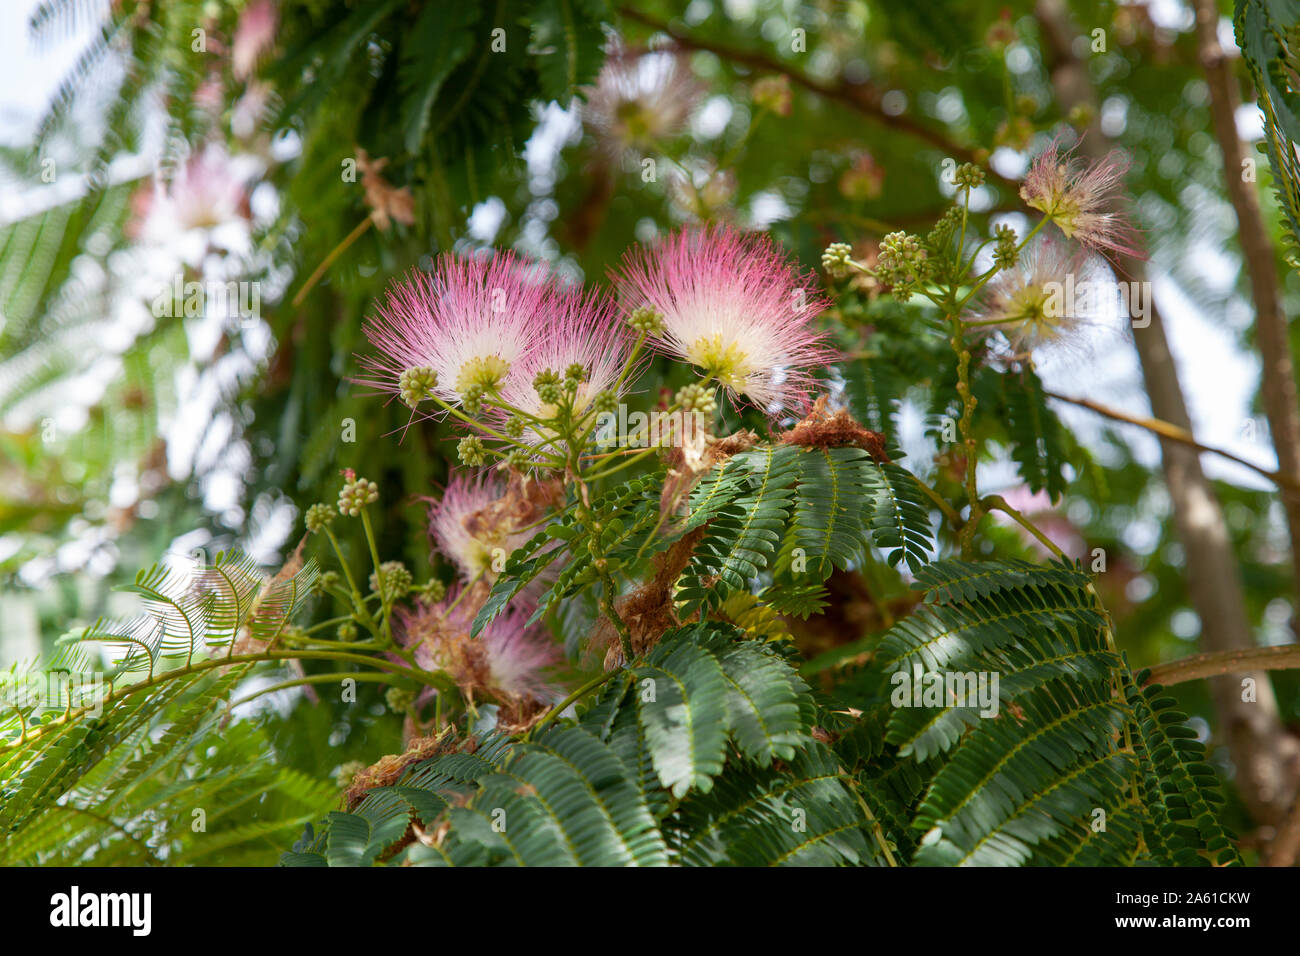 Closeup of flowers of a Persian Silk or Pink Siris tree (Albizia julibrissin) outside Brockley overground station, London SE4 Stock Photo